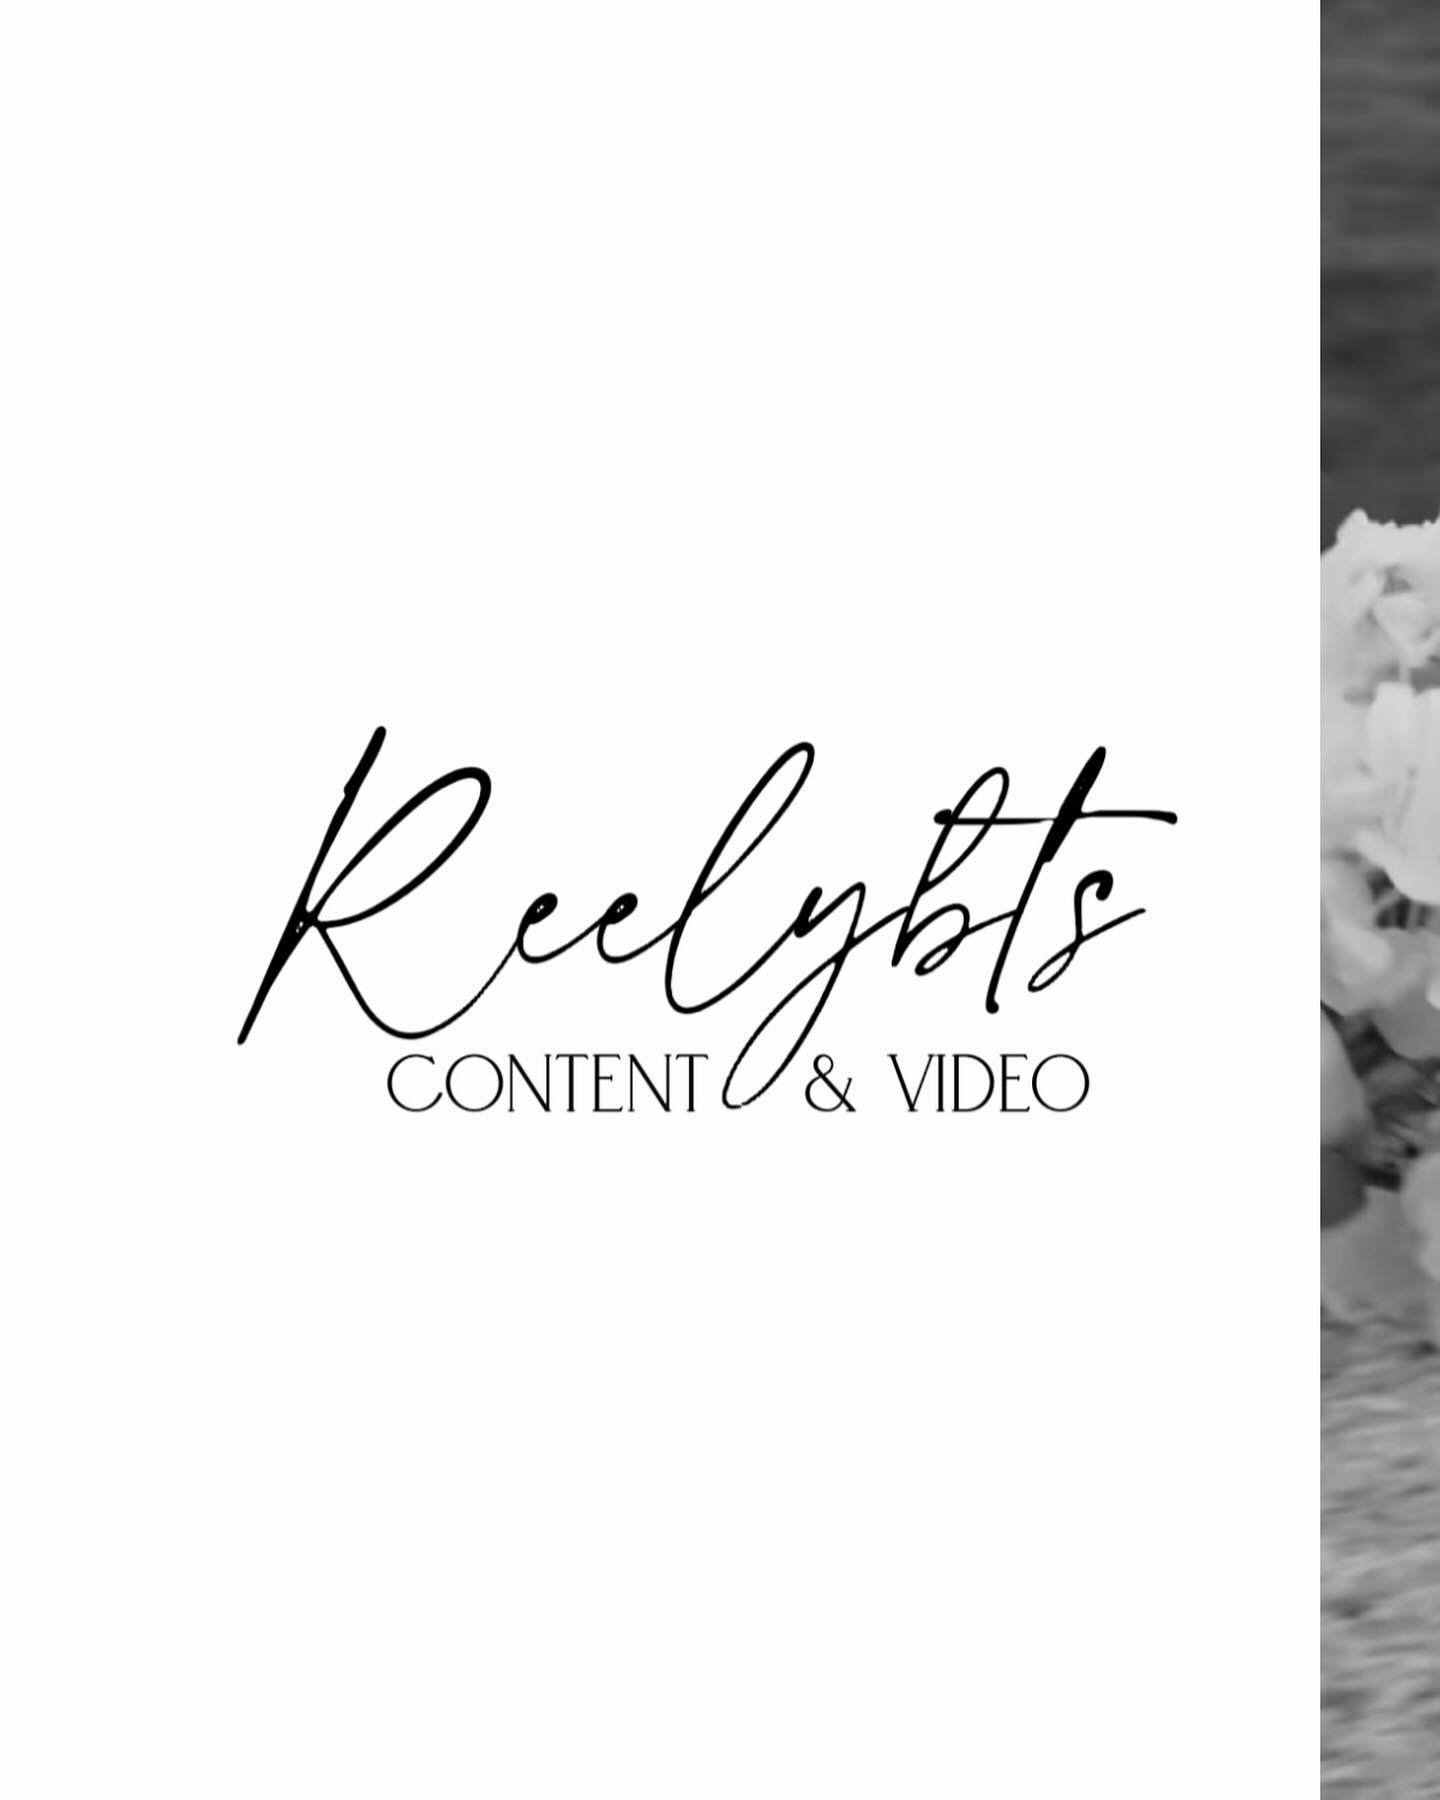 You read that correctly! 🤭
After working a few weddings and getting the best feedback from clients, I&rsquo;ve been inspired to add videography to my packages. I&rsquo;ve tossed the idea around for a while and have always loved videography, but I&rs